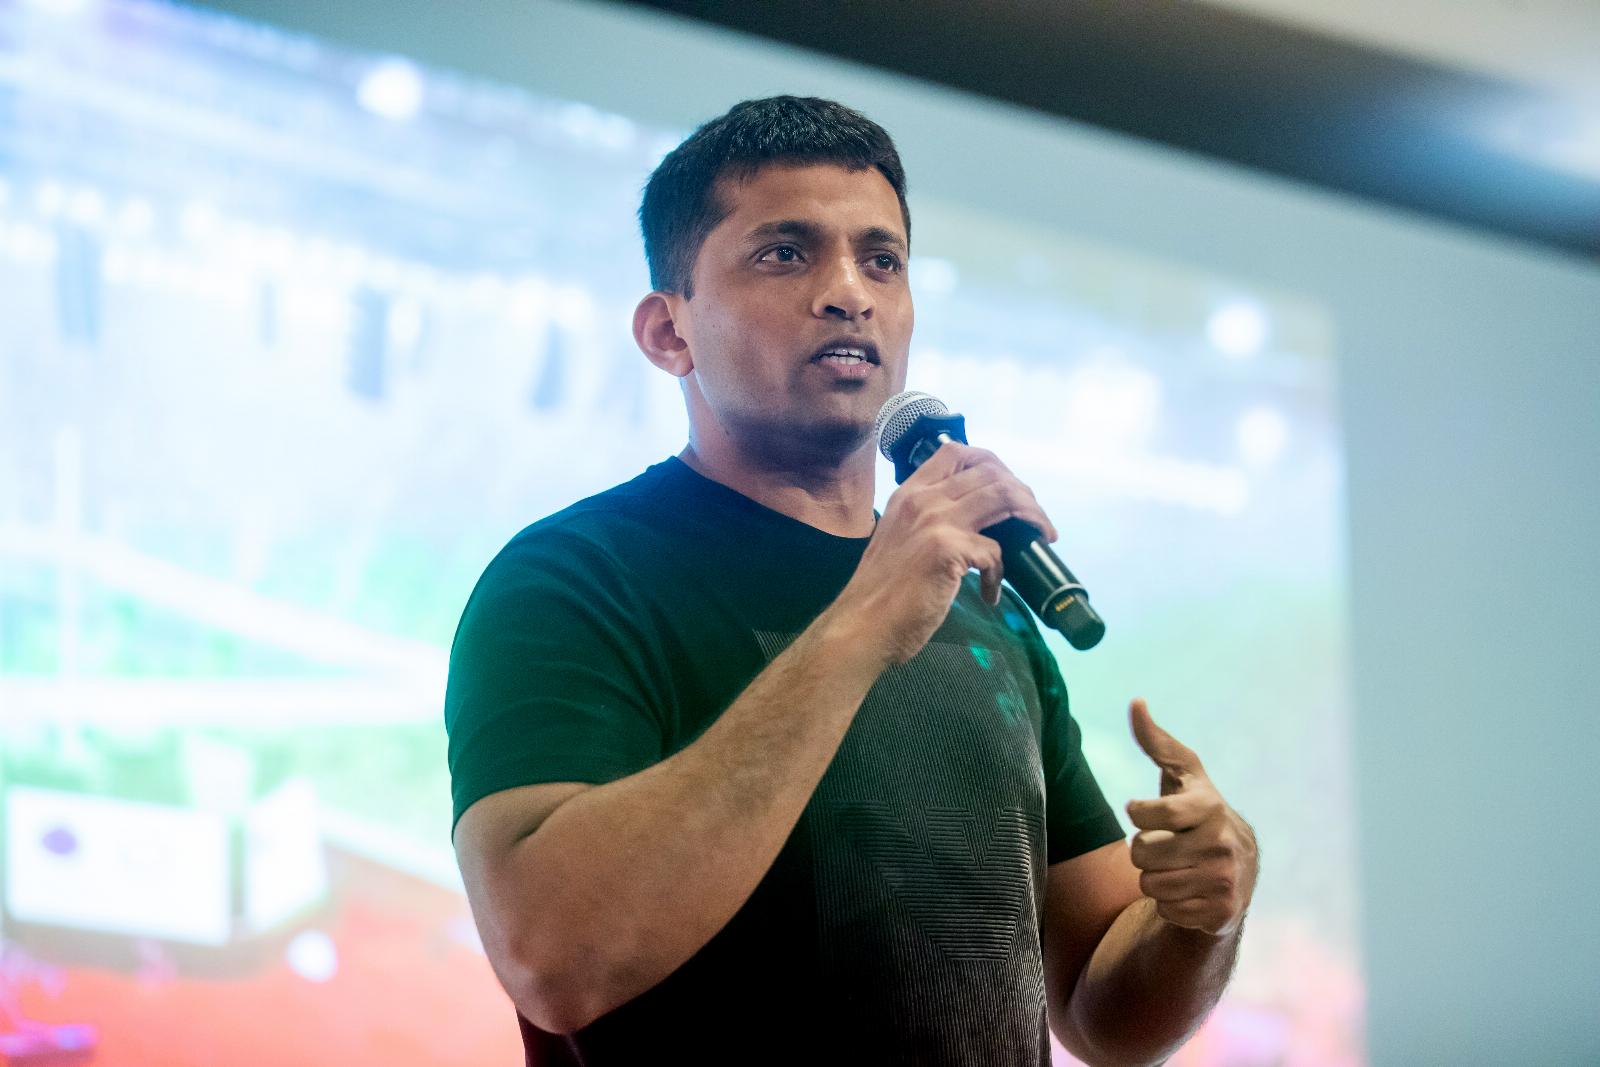 Byju’s founder floats share offer to make peace with estranged investors